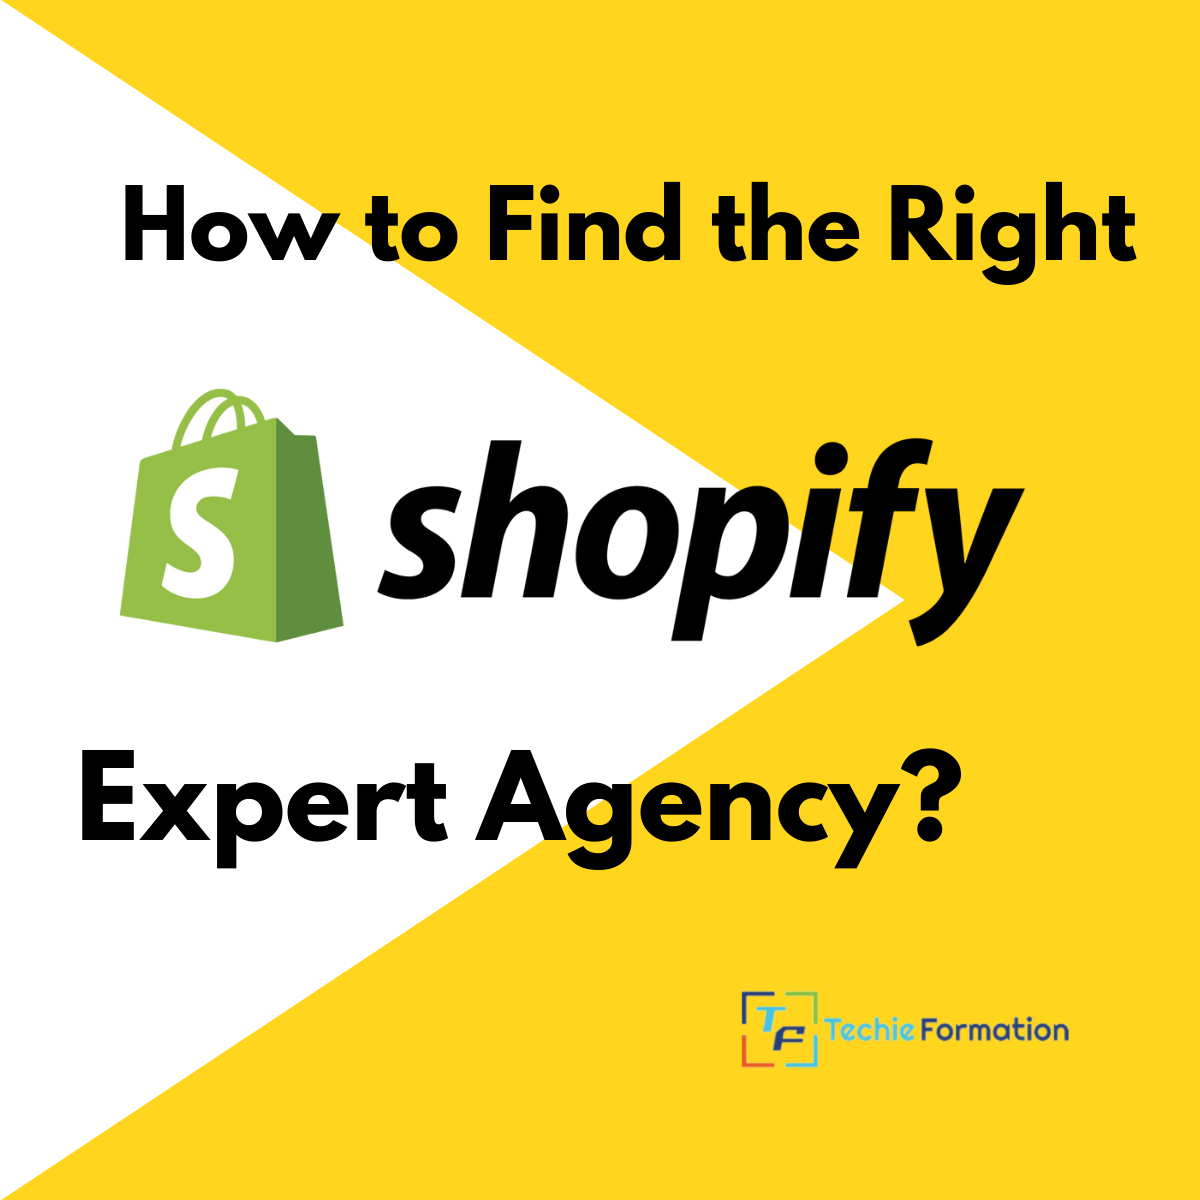 How to Find the Right Shopify Expert Agency